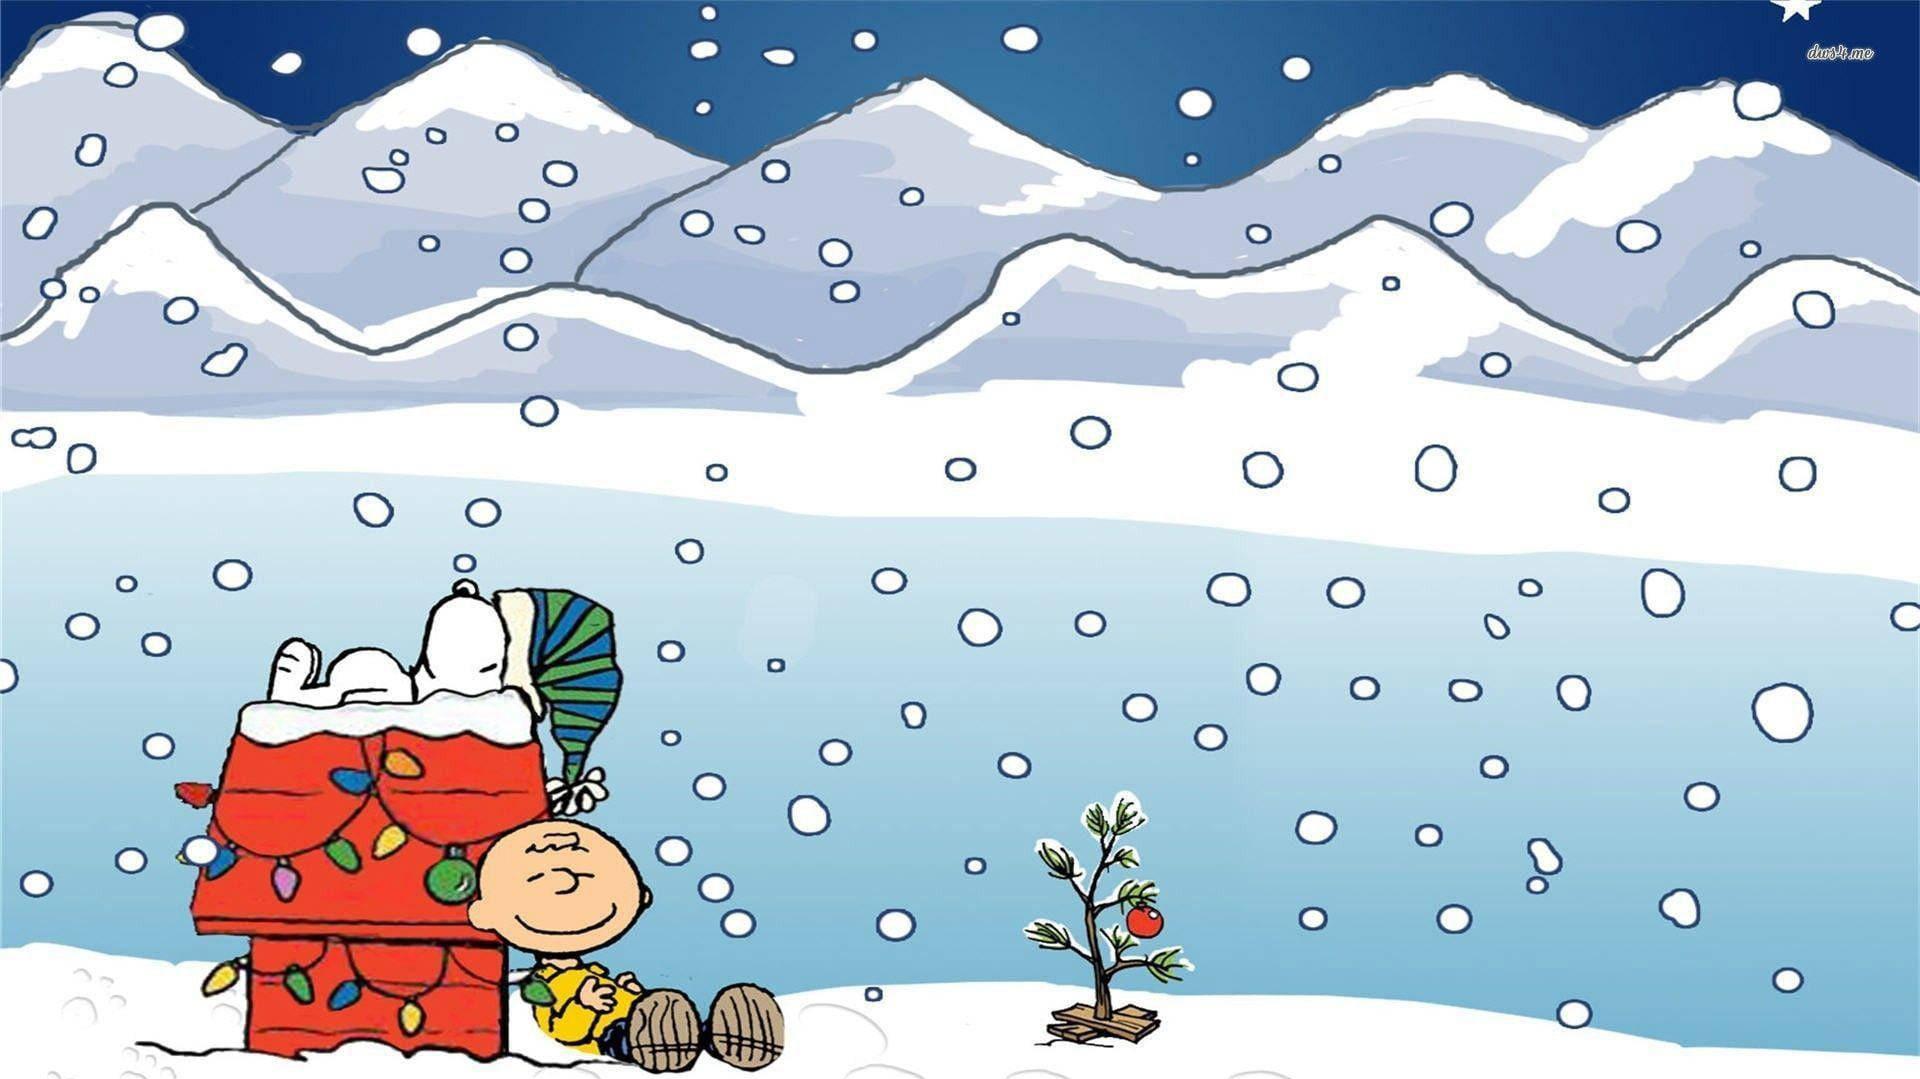 Download Snoopy Christmas Outdoor Snow Wallpaper